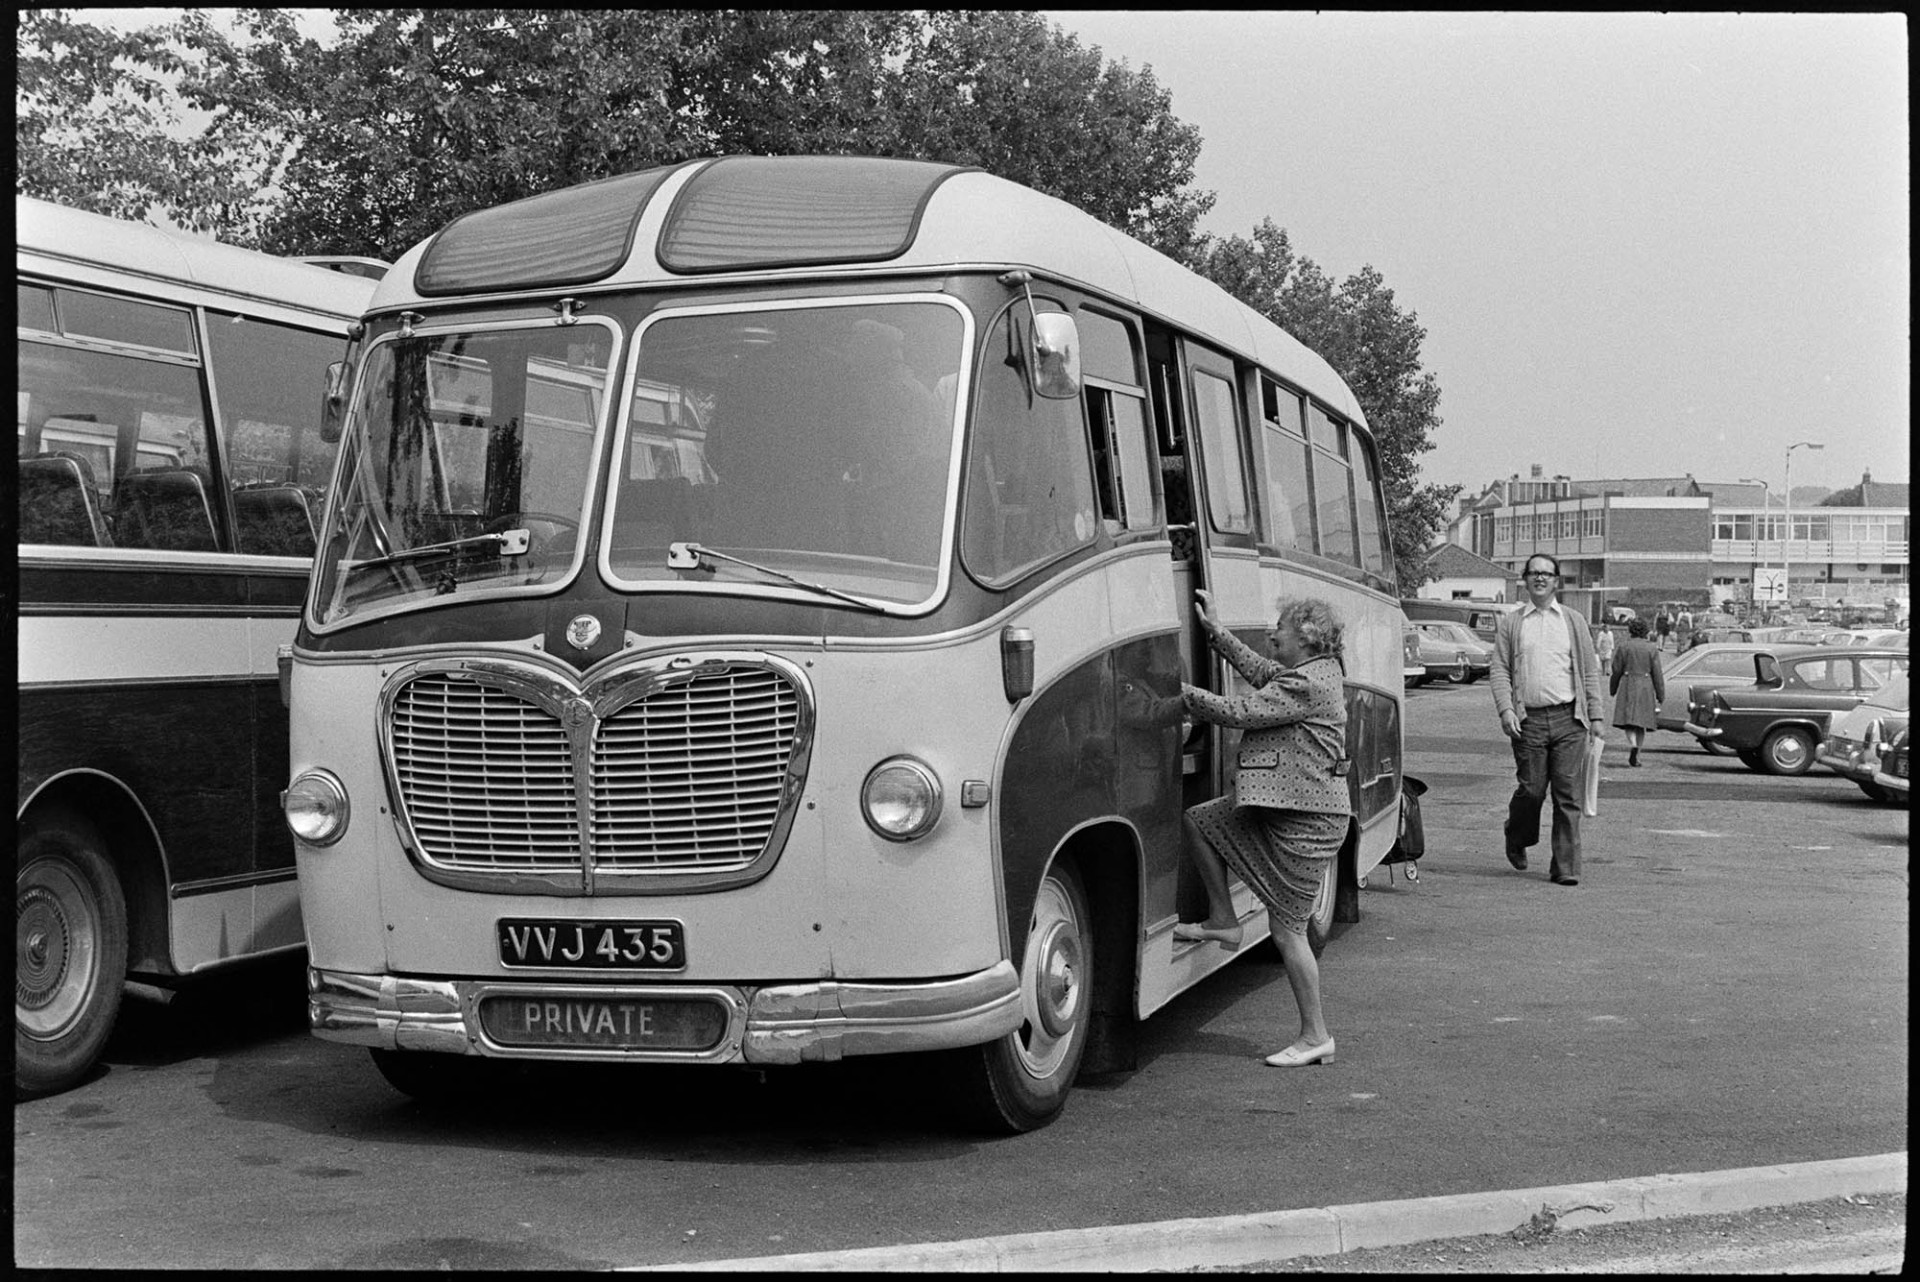 Turner's bus from Chulmleigh parked at Barnstaple.<br />
[A woman getting onto Turner's bus which travelled to and from Varnstaple market. Rcihard Davin is walking towards the bus. Other parked cars and shoppers are in the background.]